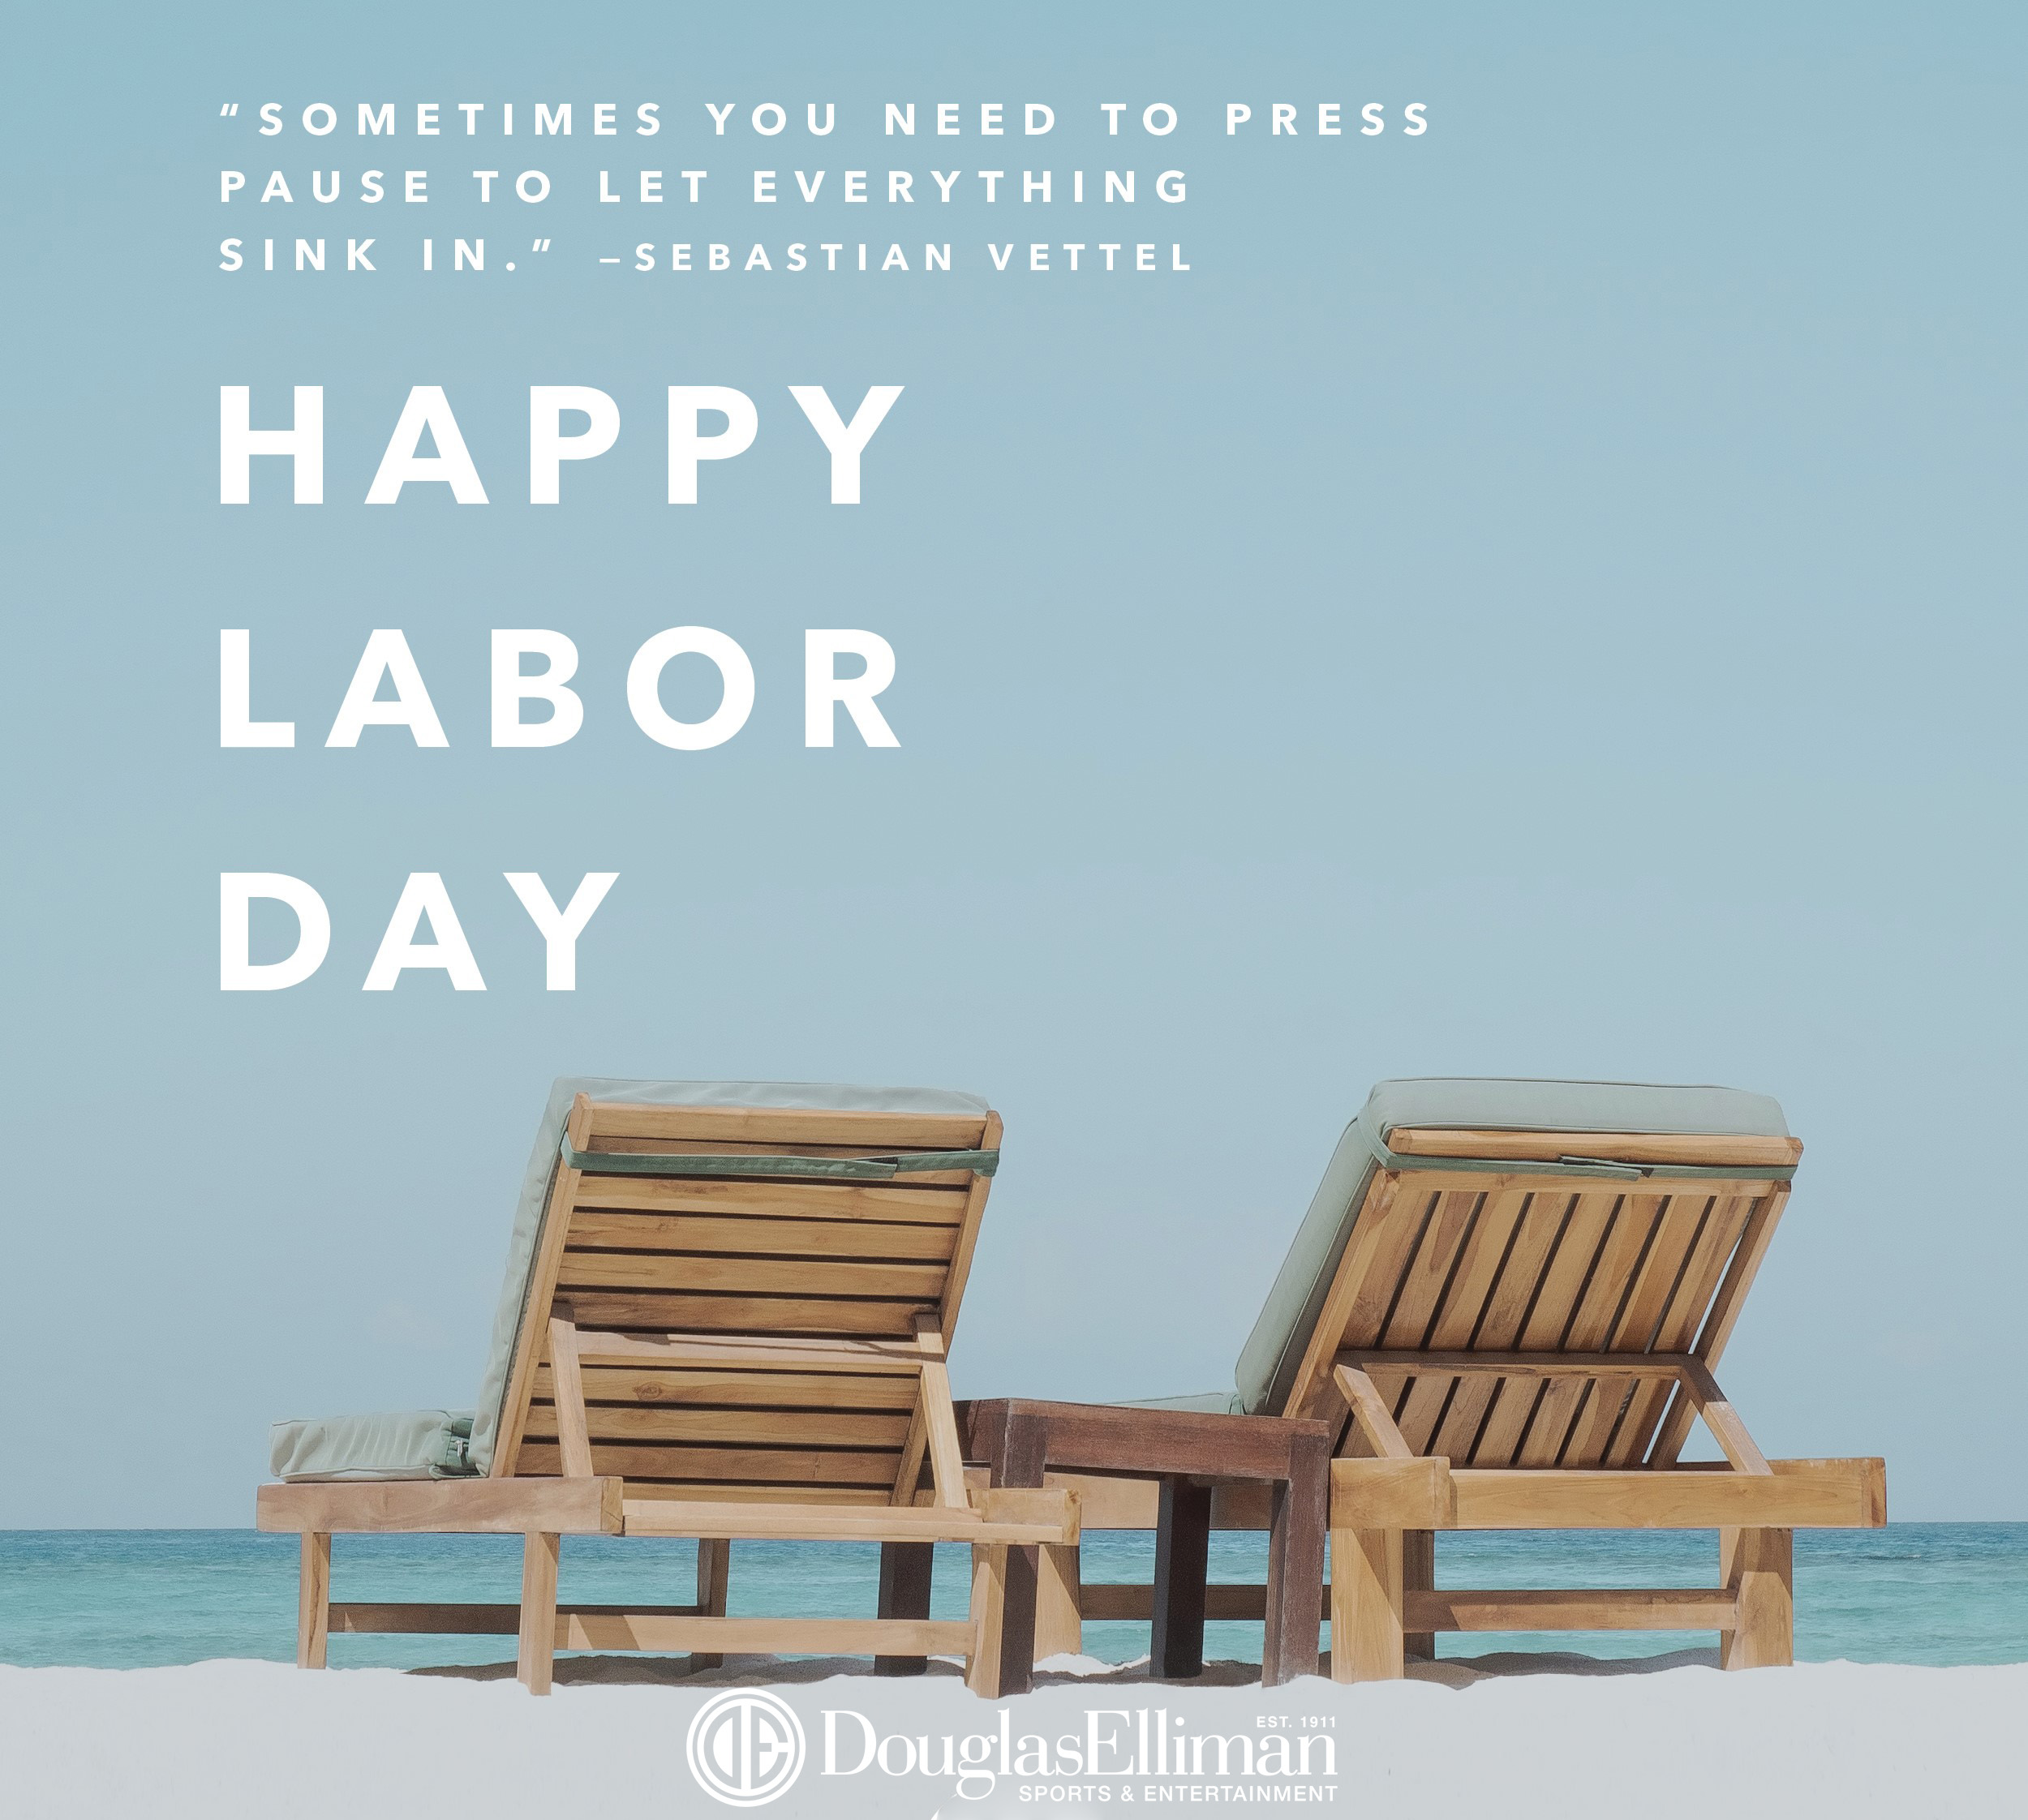 Happy Labor Day Weekend 2018!